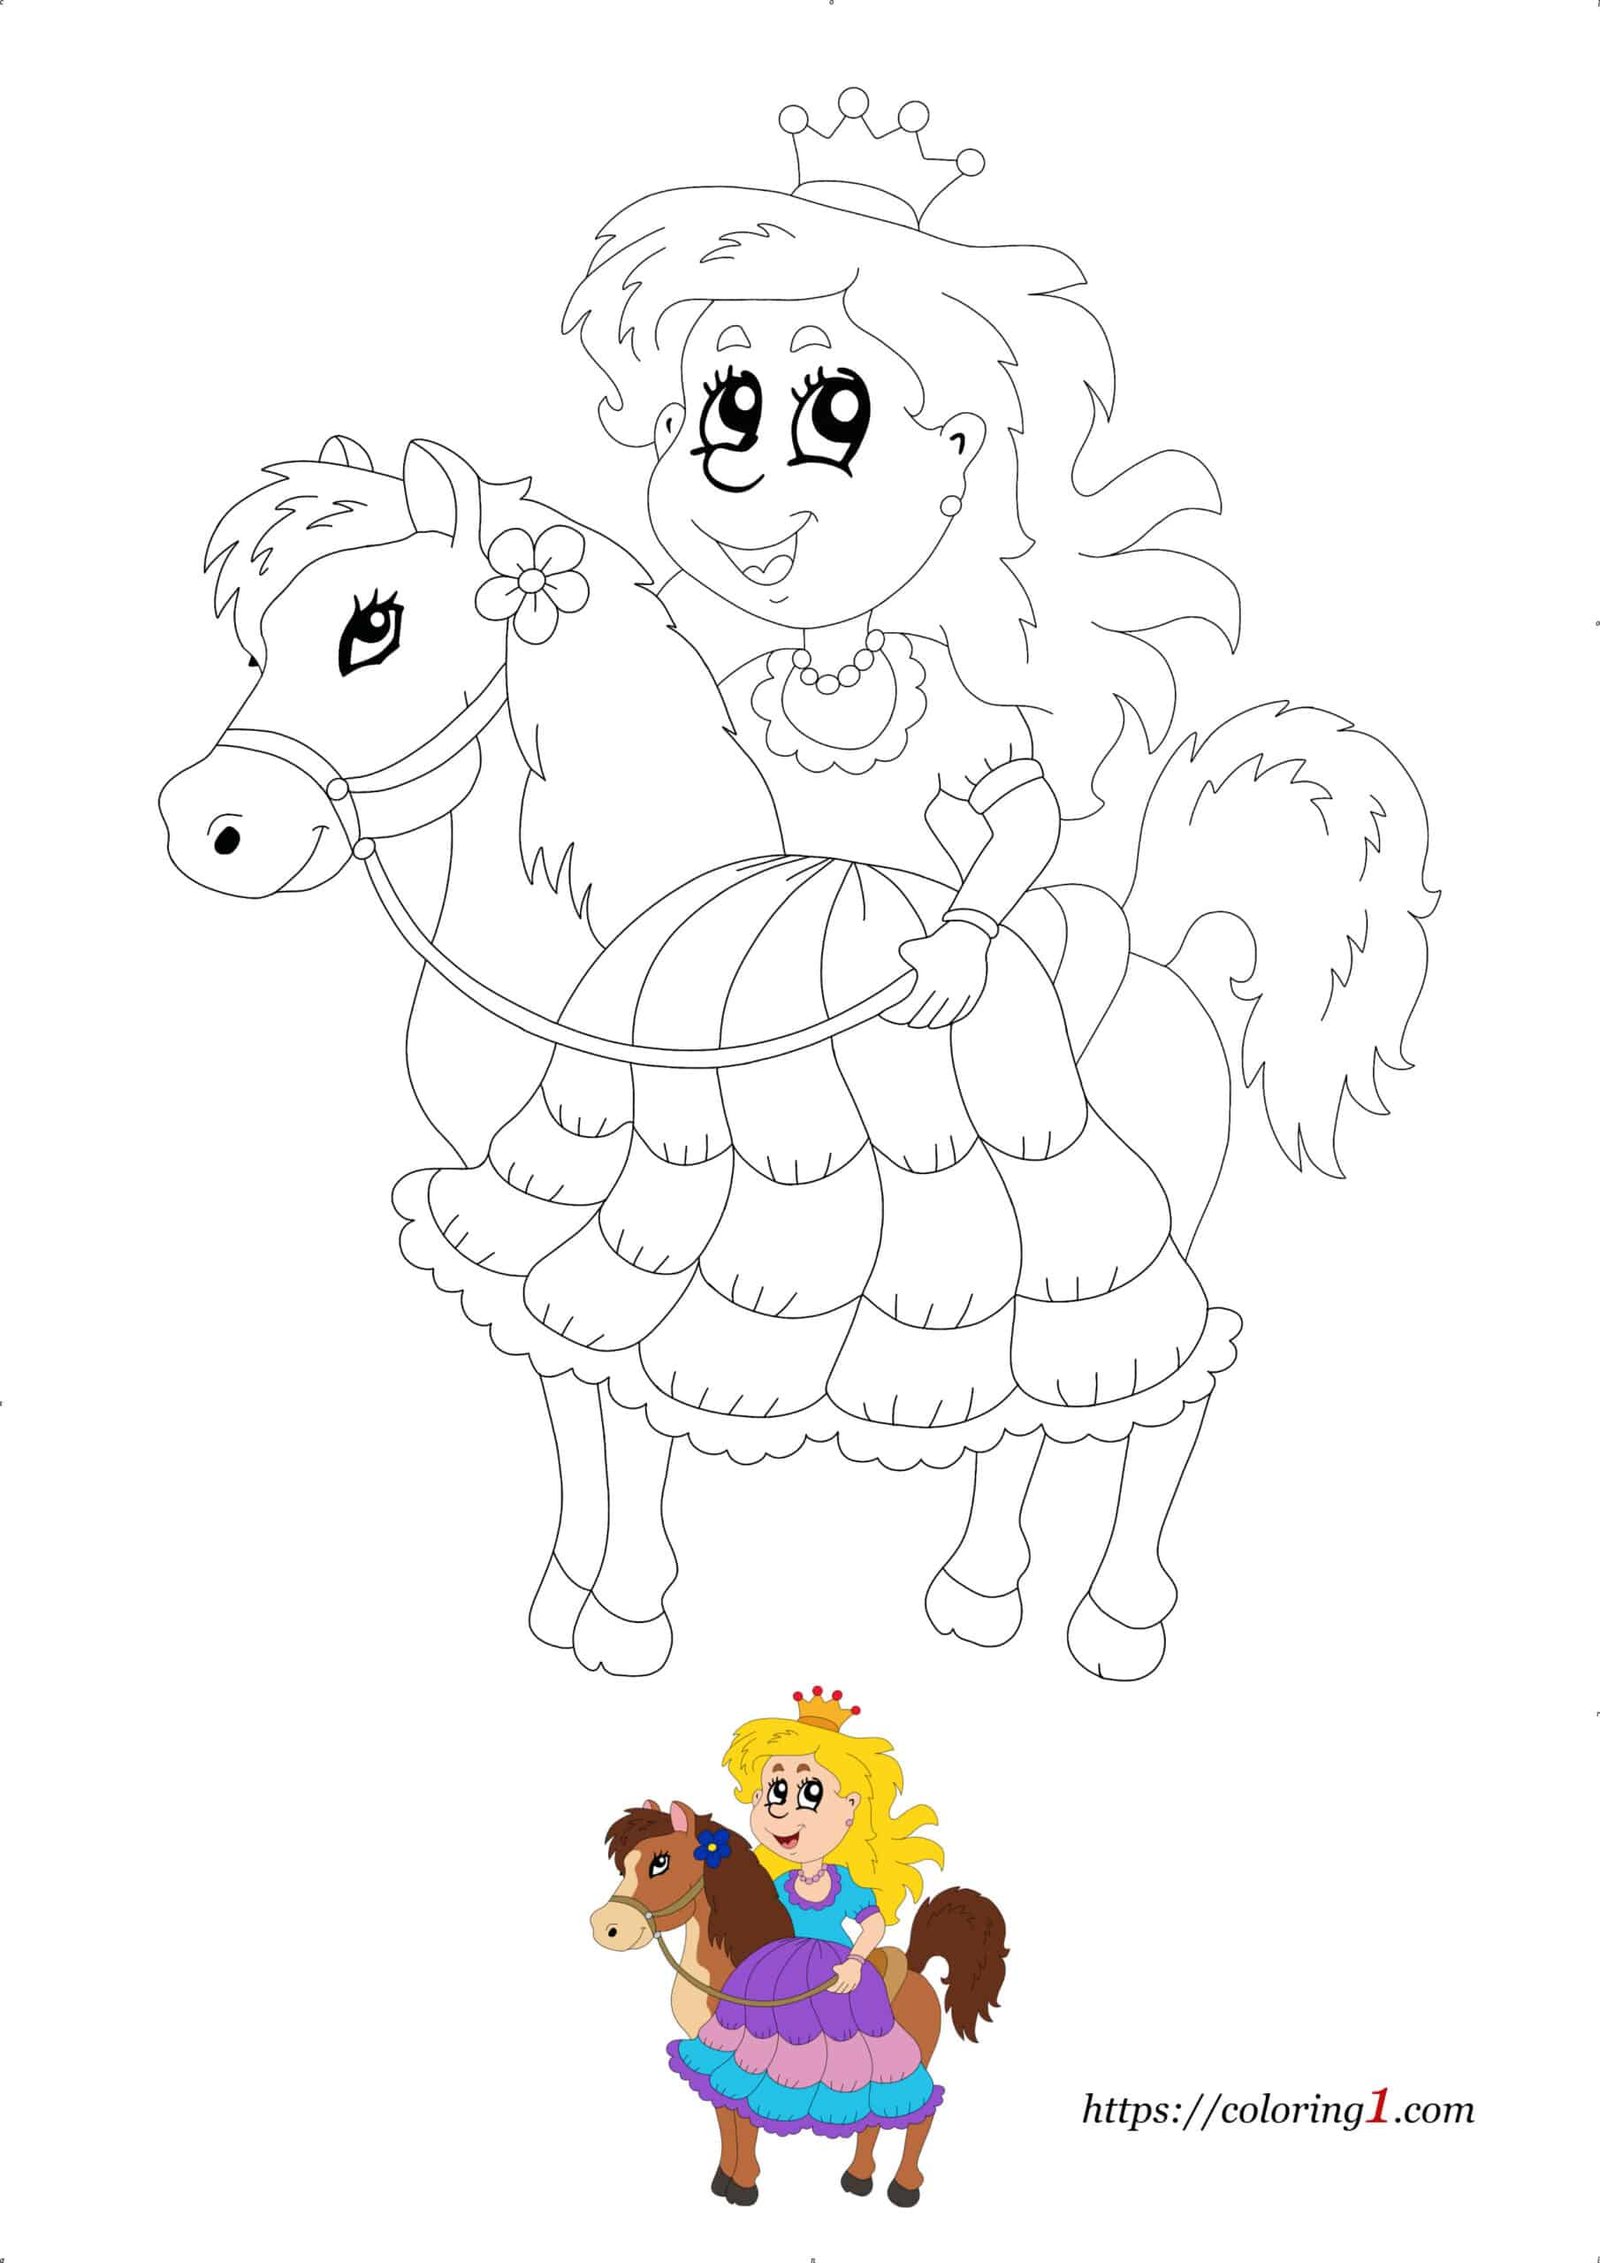 Princess Horse printable coloring page for girls